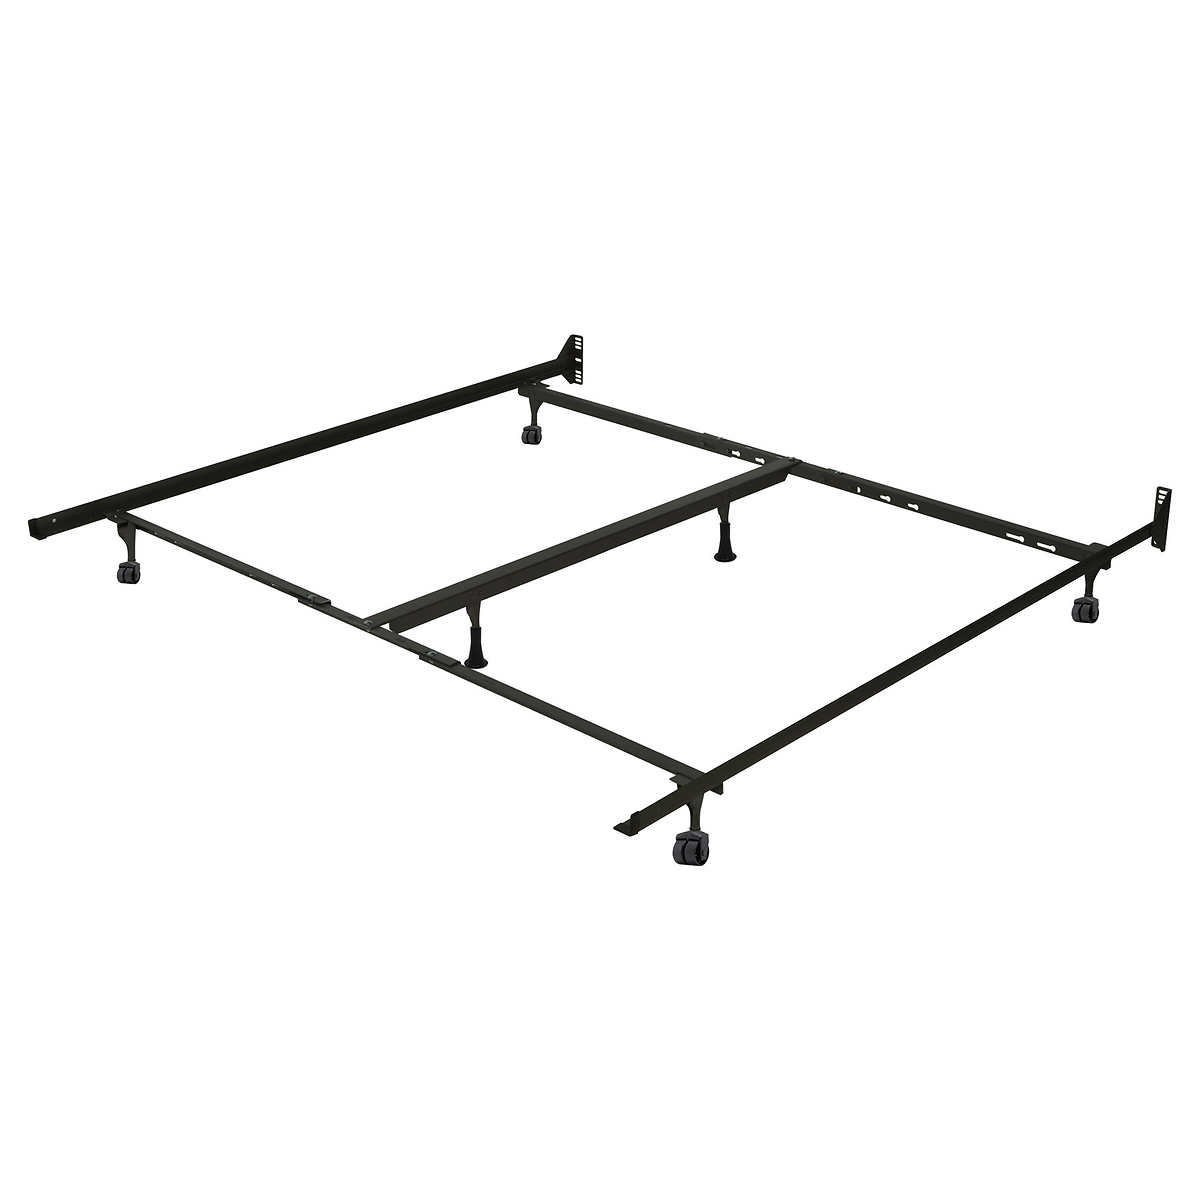 Universal Metal Bed Frame Costco, Hollywood Bed Frame Costco